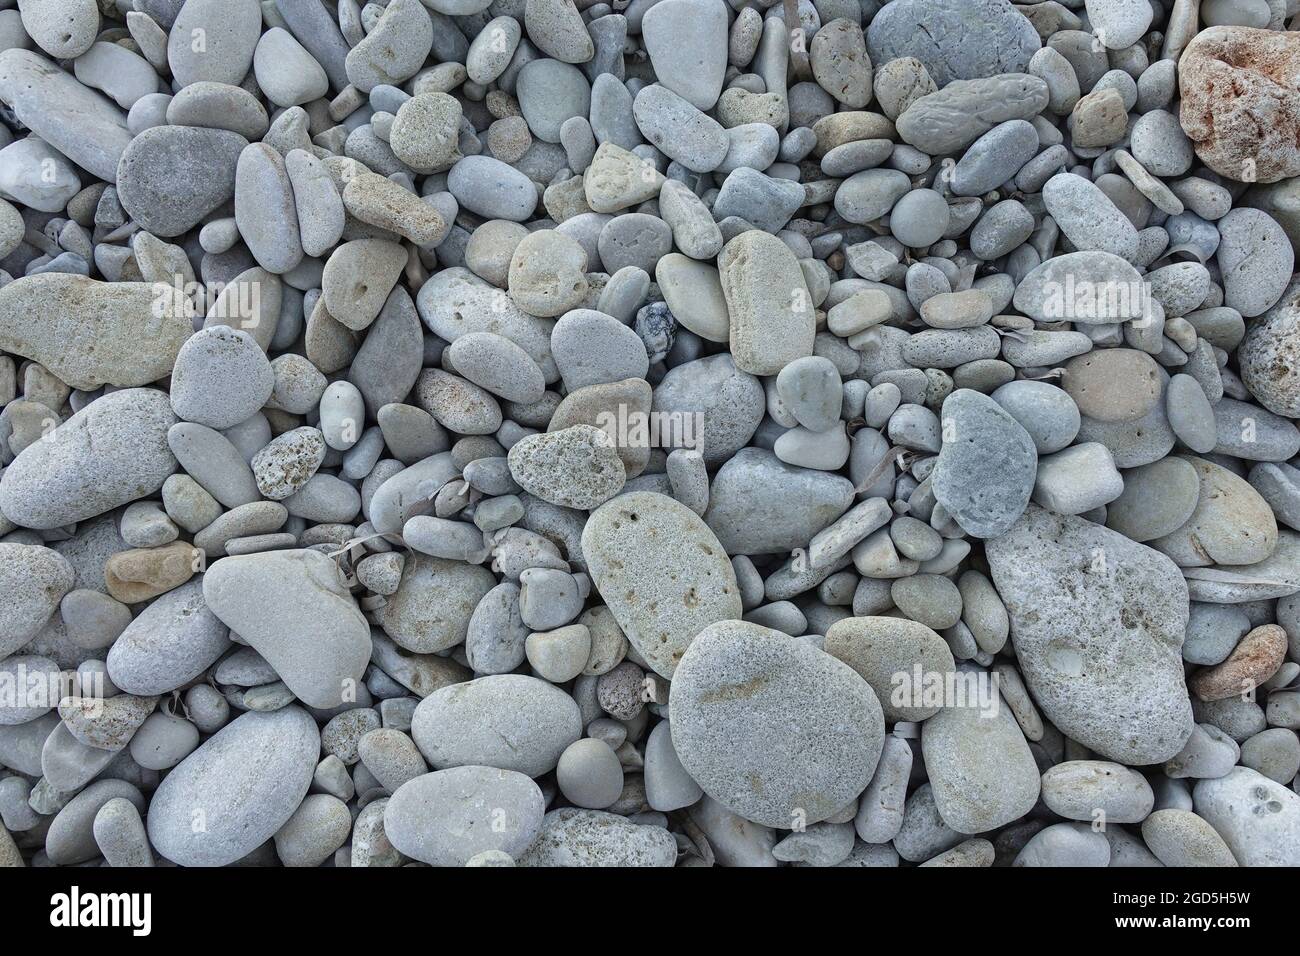 Pebbles on rocky beach. Stones and small rocks background. Stock Photo